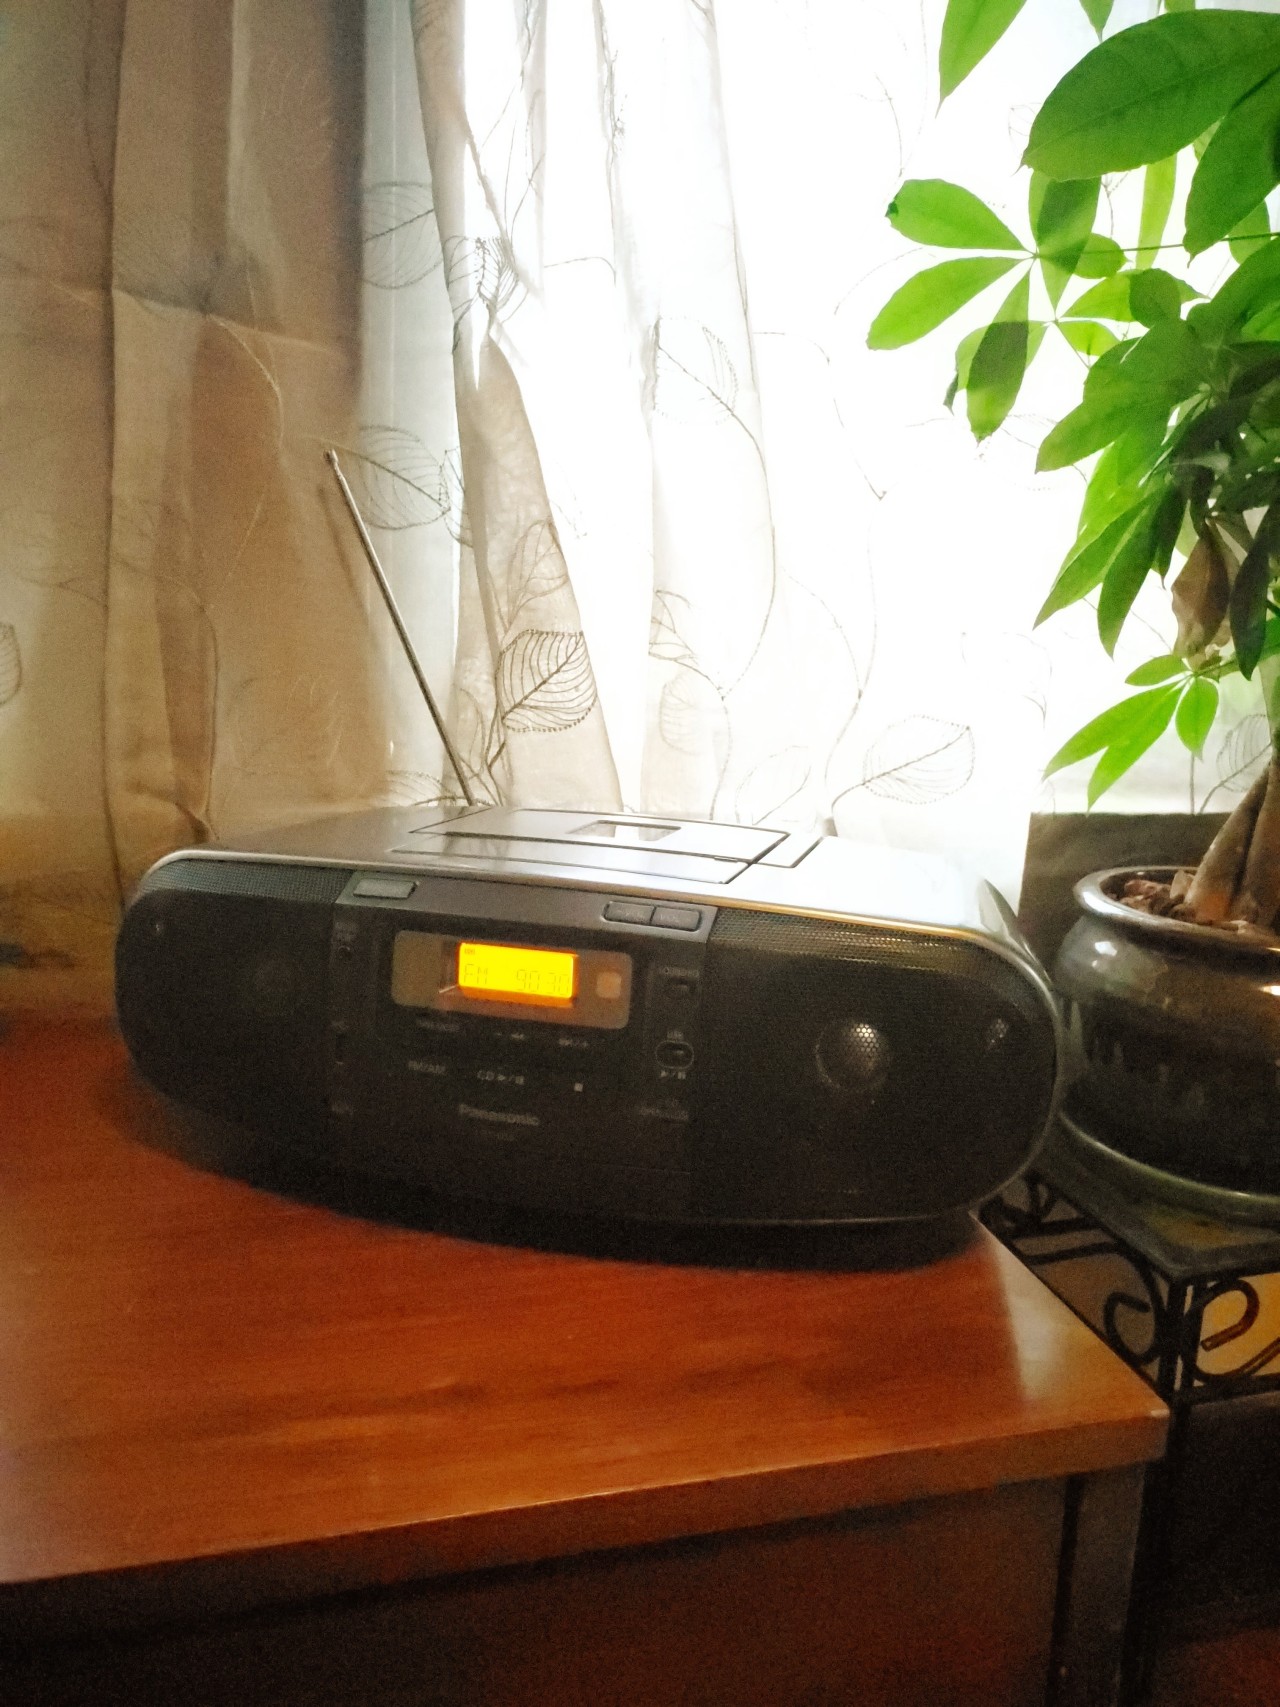 a boombox with a glowing orange LCD sitting on a short wooden dresser and illuminated by sunlight. next to the boombox is a leafy ornamental money tree plant with braided stalks.